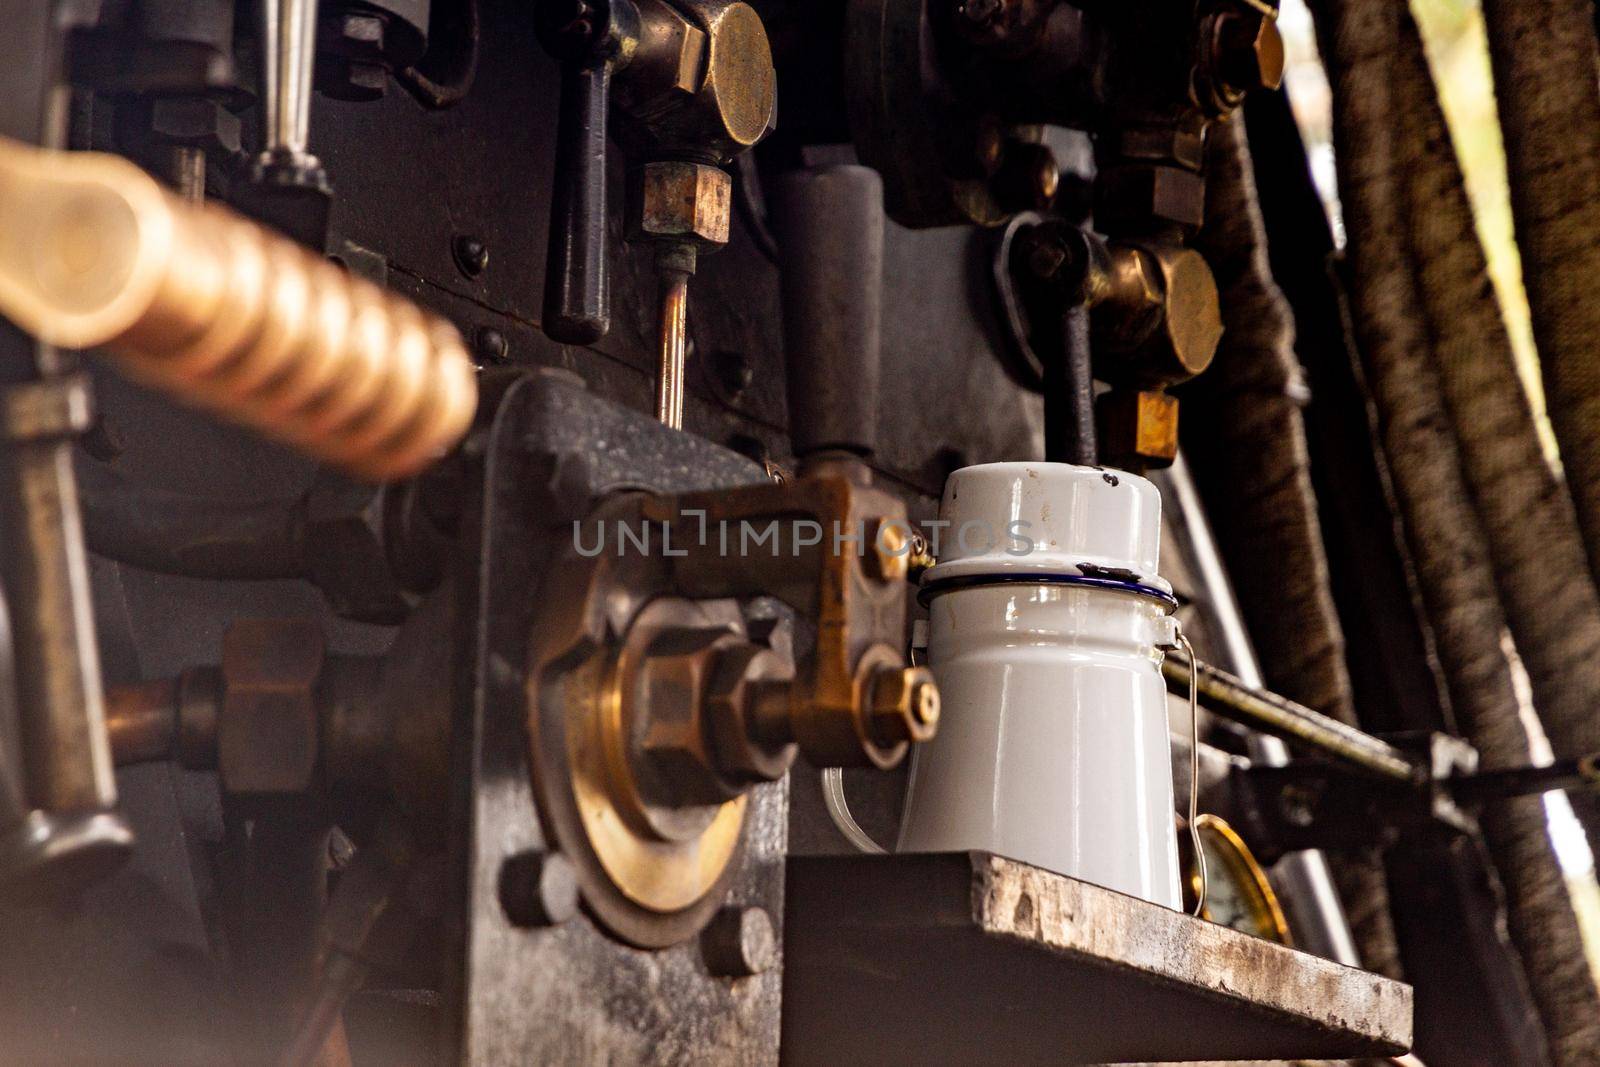 An old white enamel jug inside an old steam locomotive surrounded by metal levers and nuts